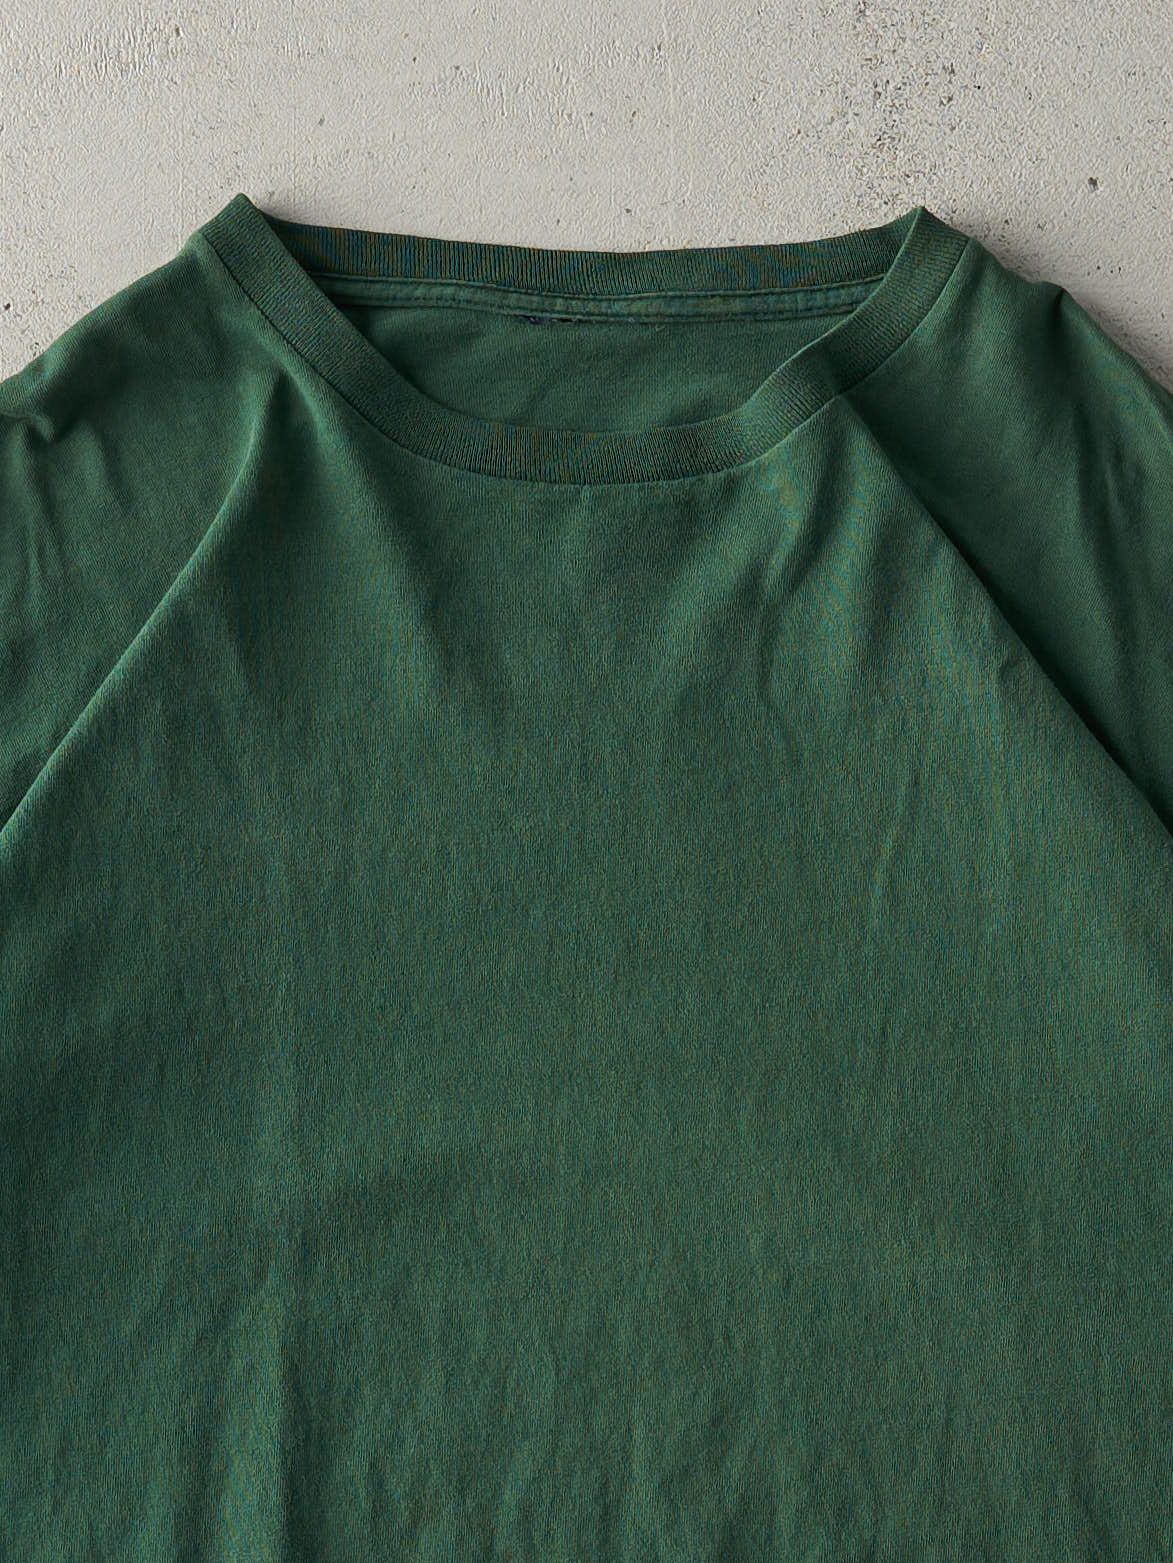 Vintage 90s Forest Green Blank Tee (L/XL)